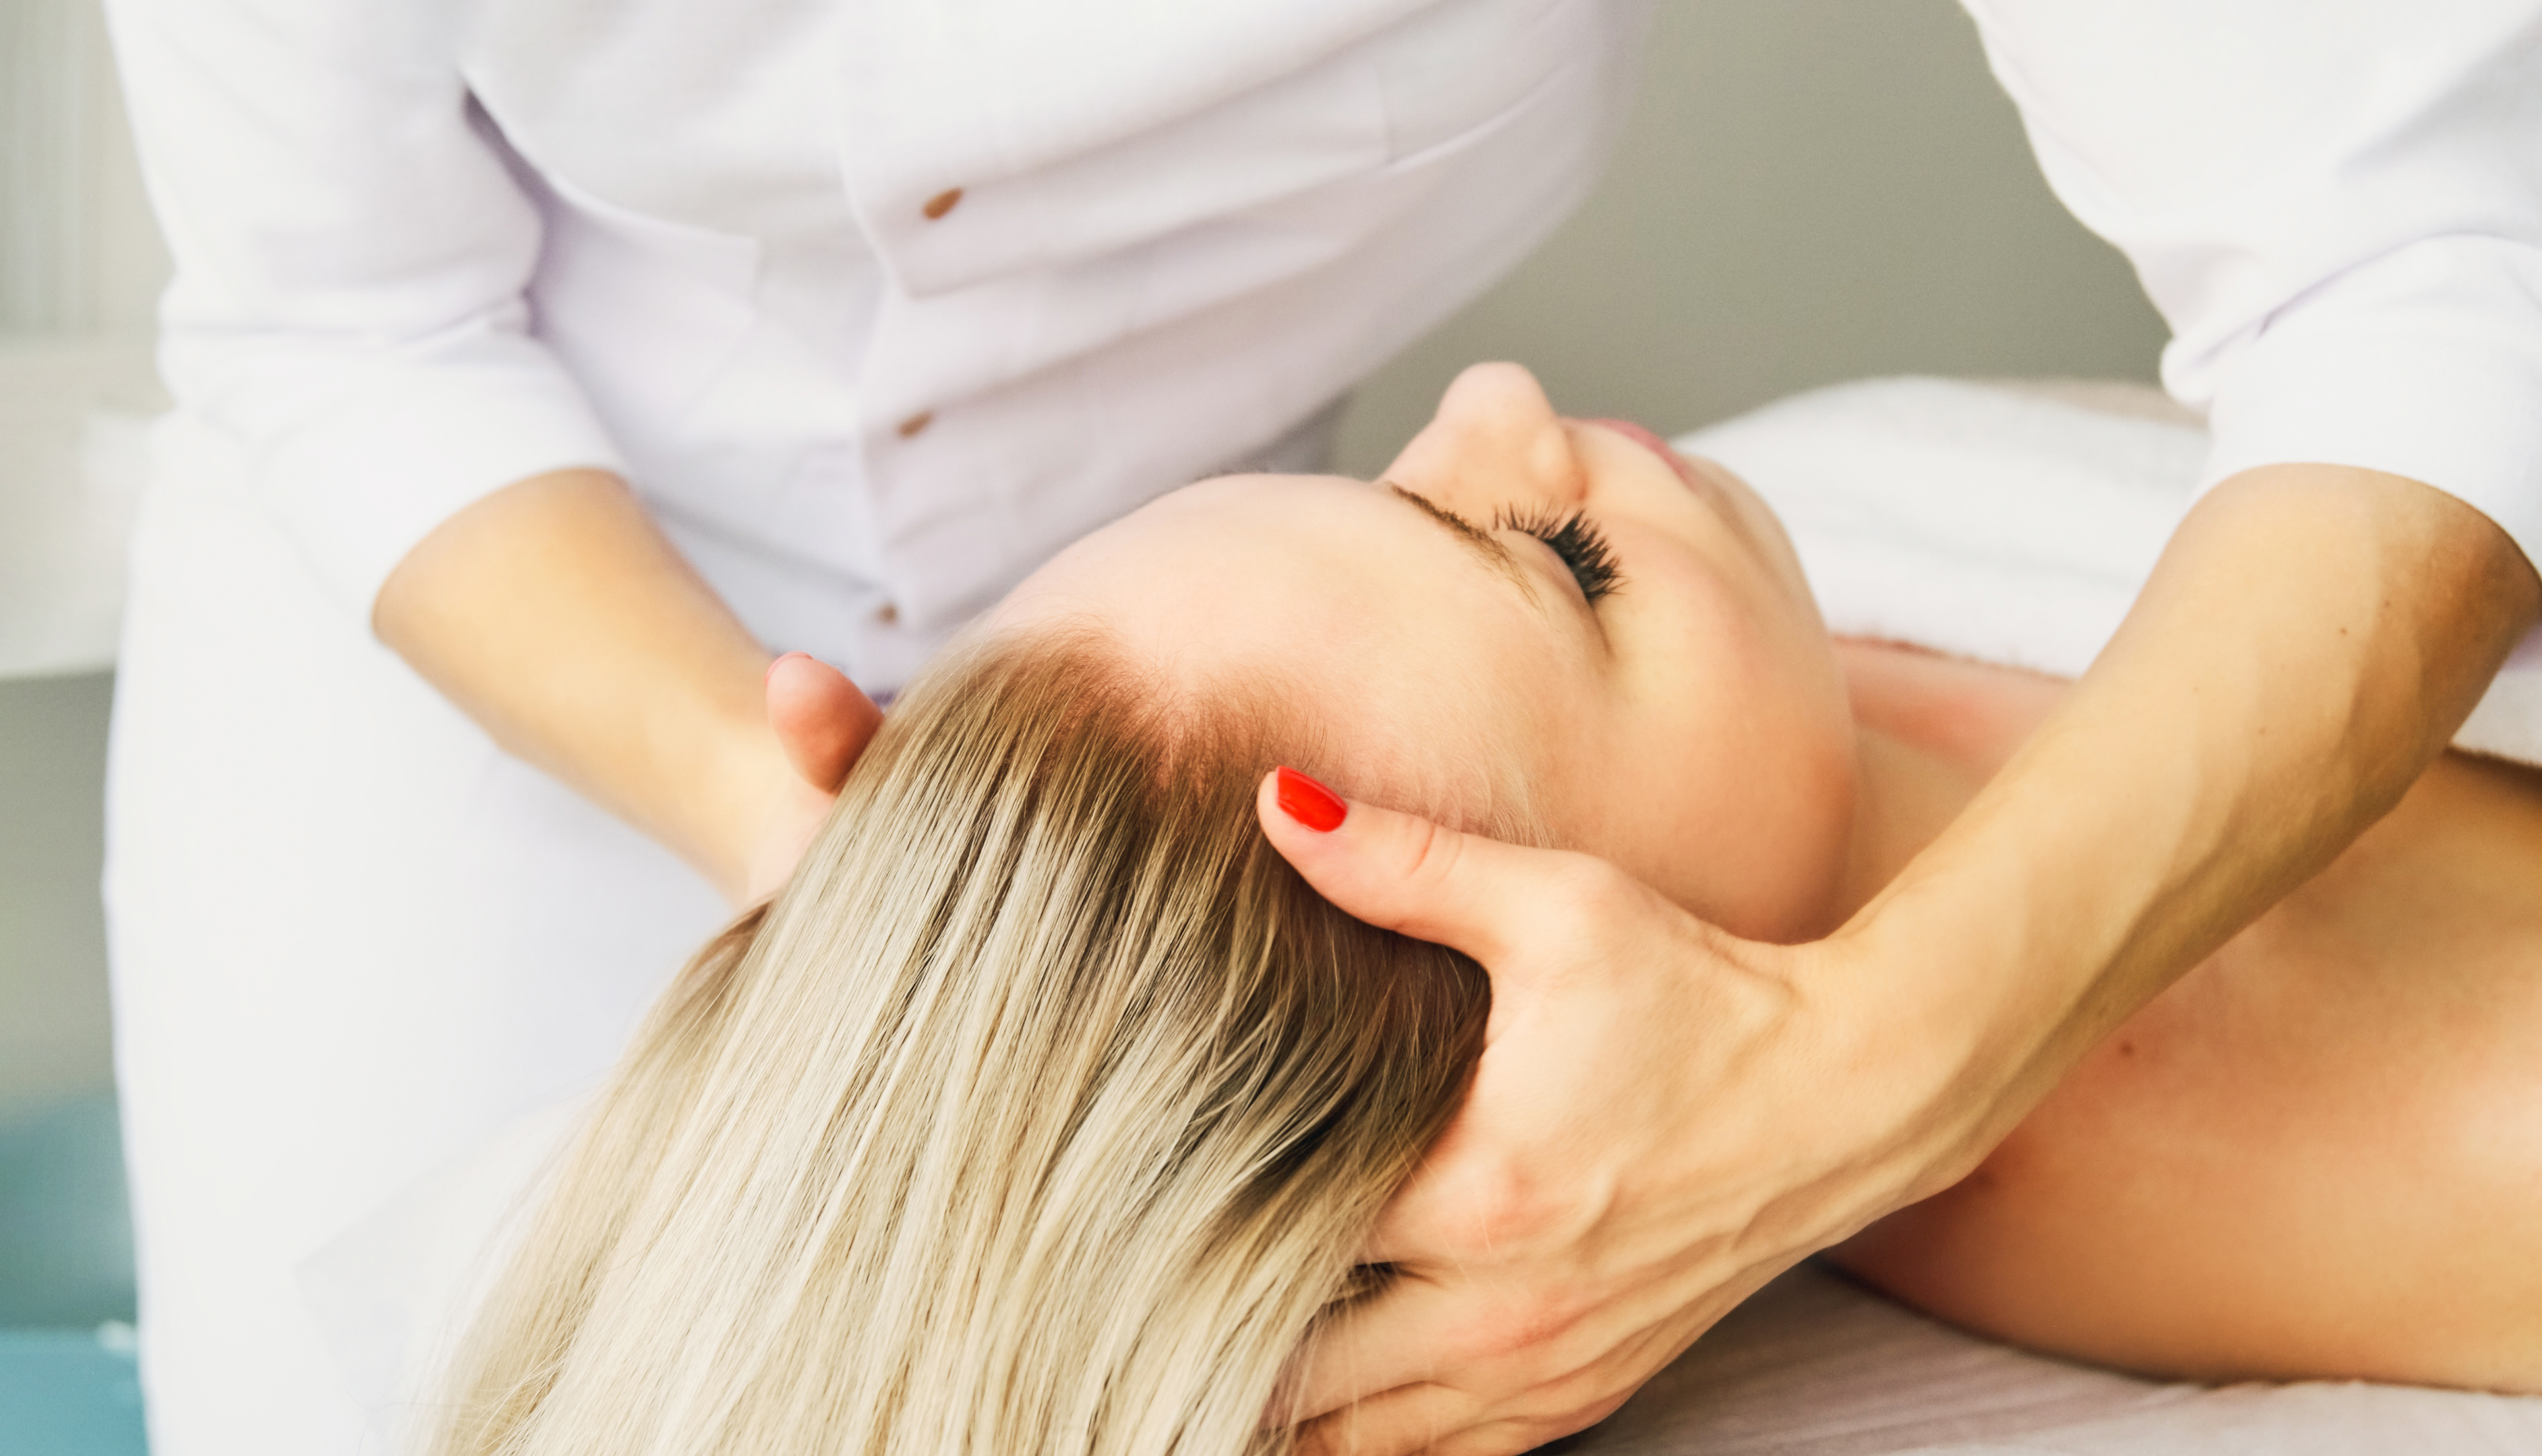 Oil massage can boost hair growth